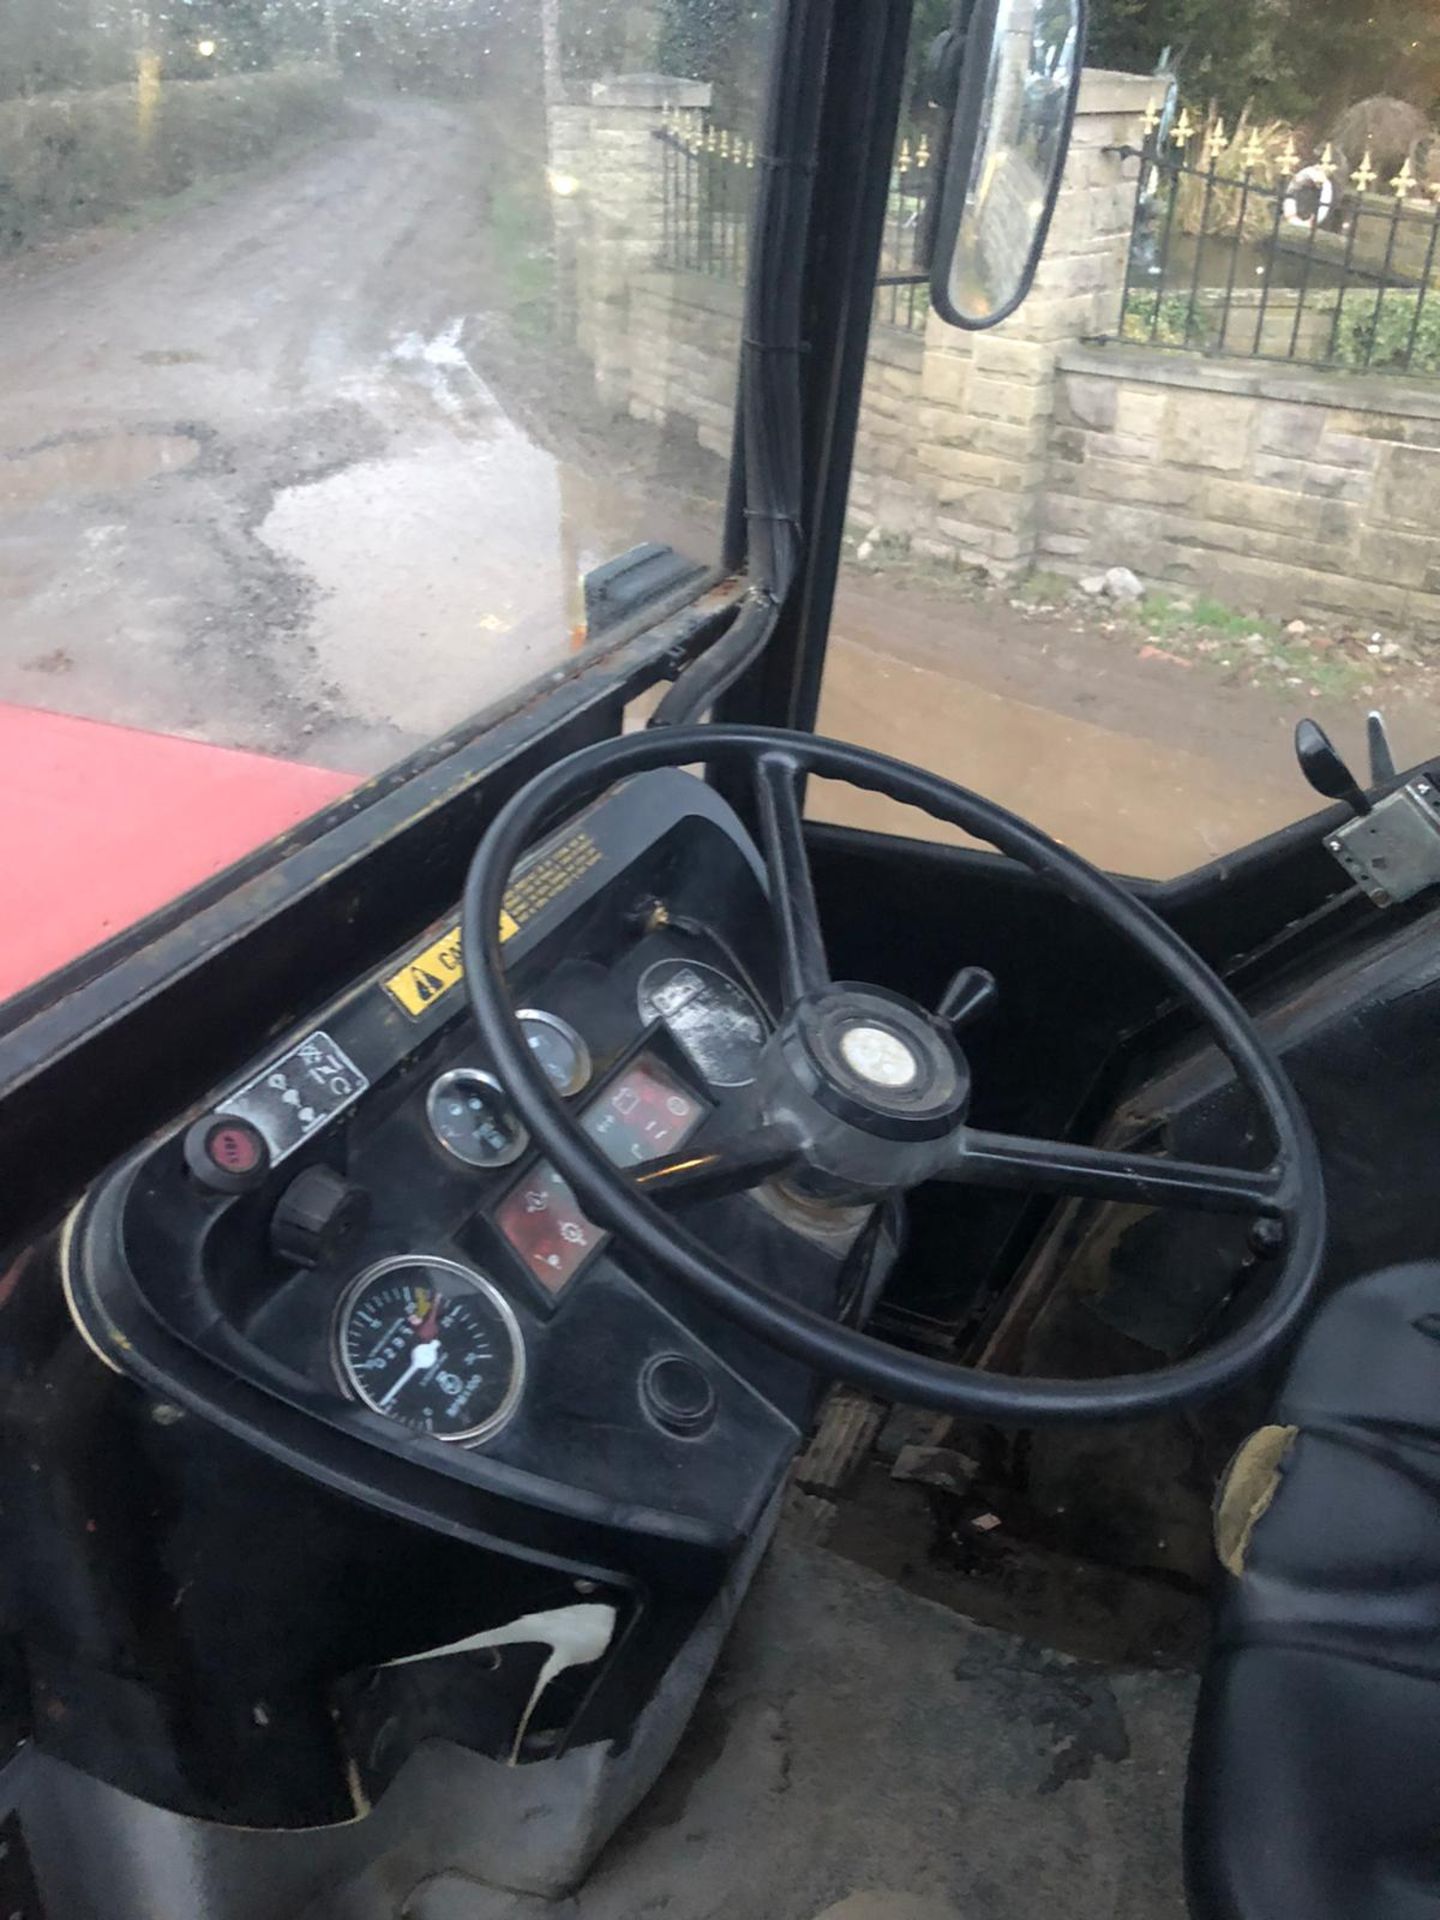 1985/C REG CASE INTERNATIONAL 885 DIESEL RED TRACTOR, RUNS AND WORKS, IN GOOD CONDITION *PLUS VAT* - Image 9 of 9